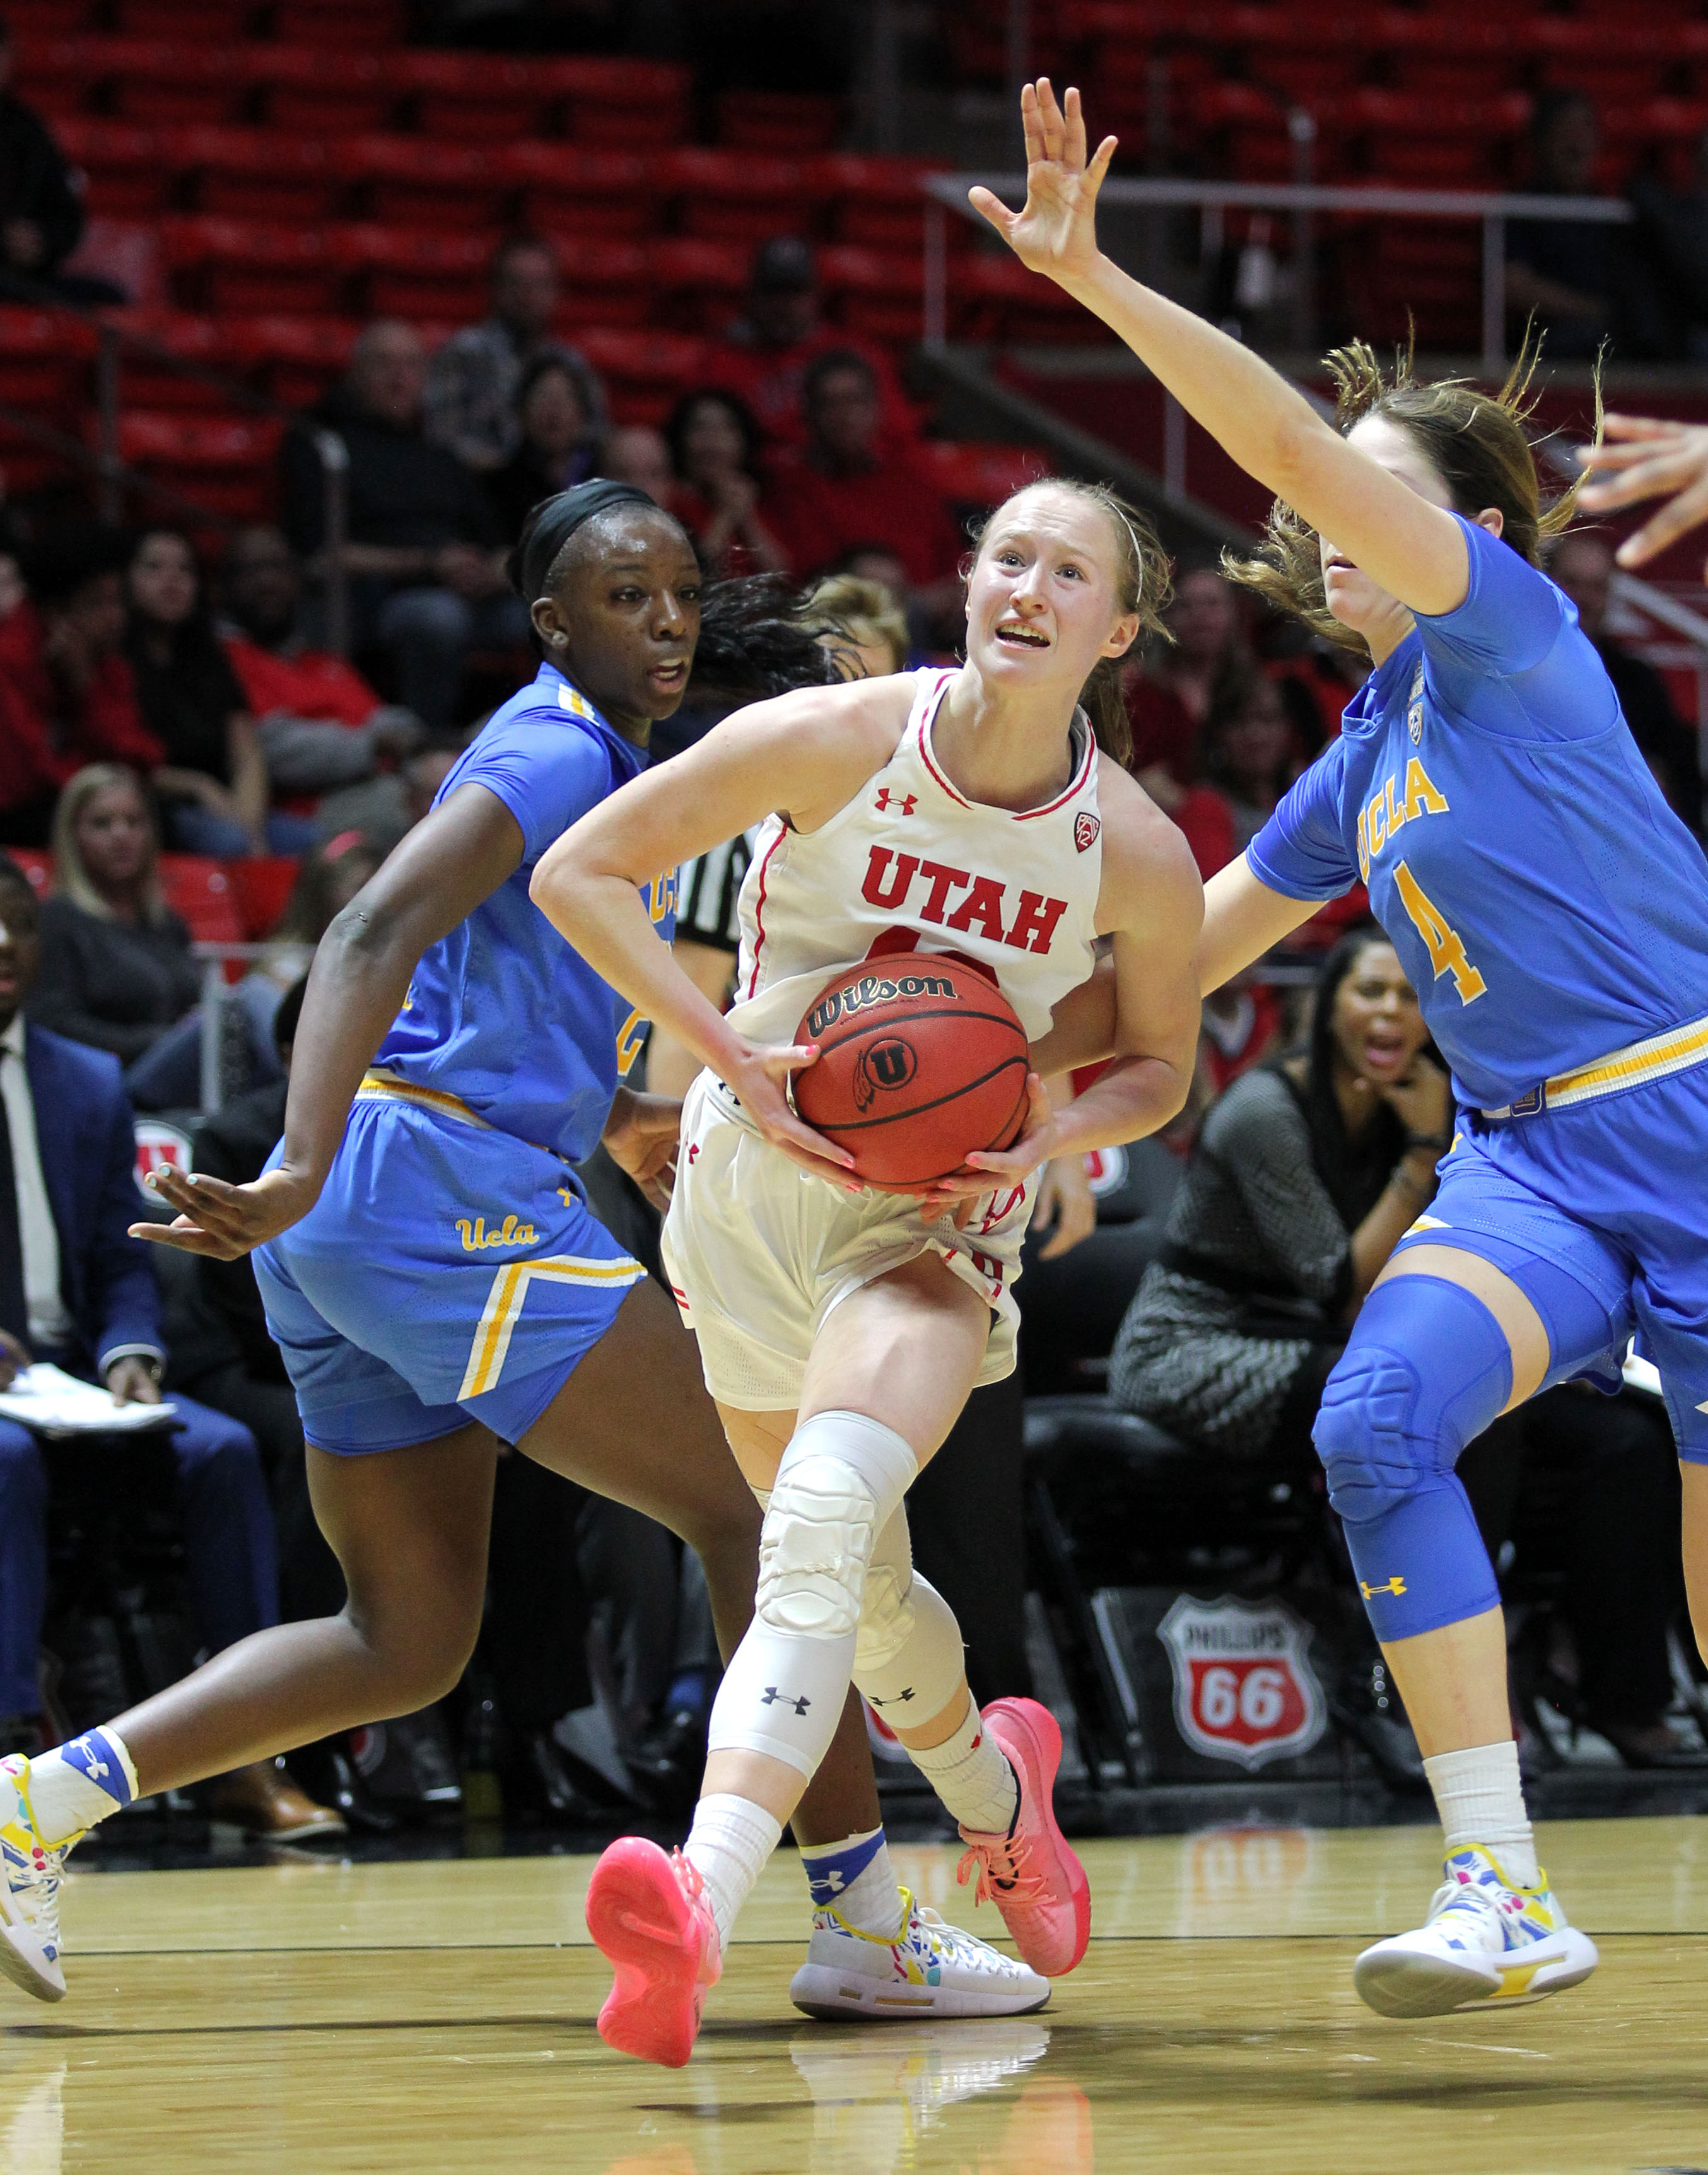 Picture of Dru Gylten getting double teamed by her UCLA opponents during a women's basketball game